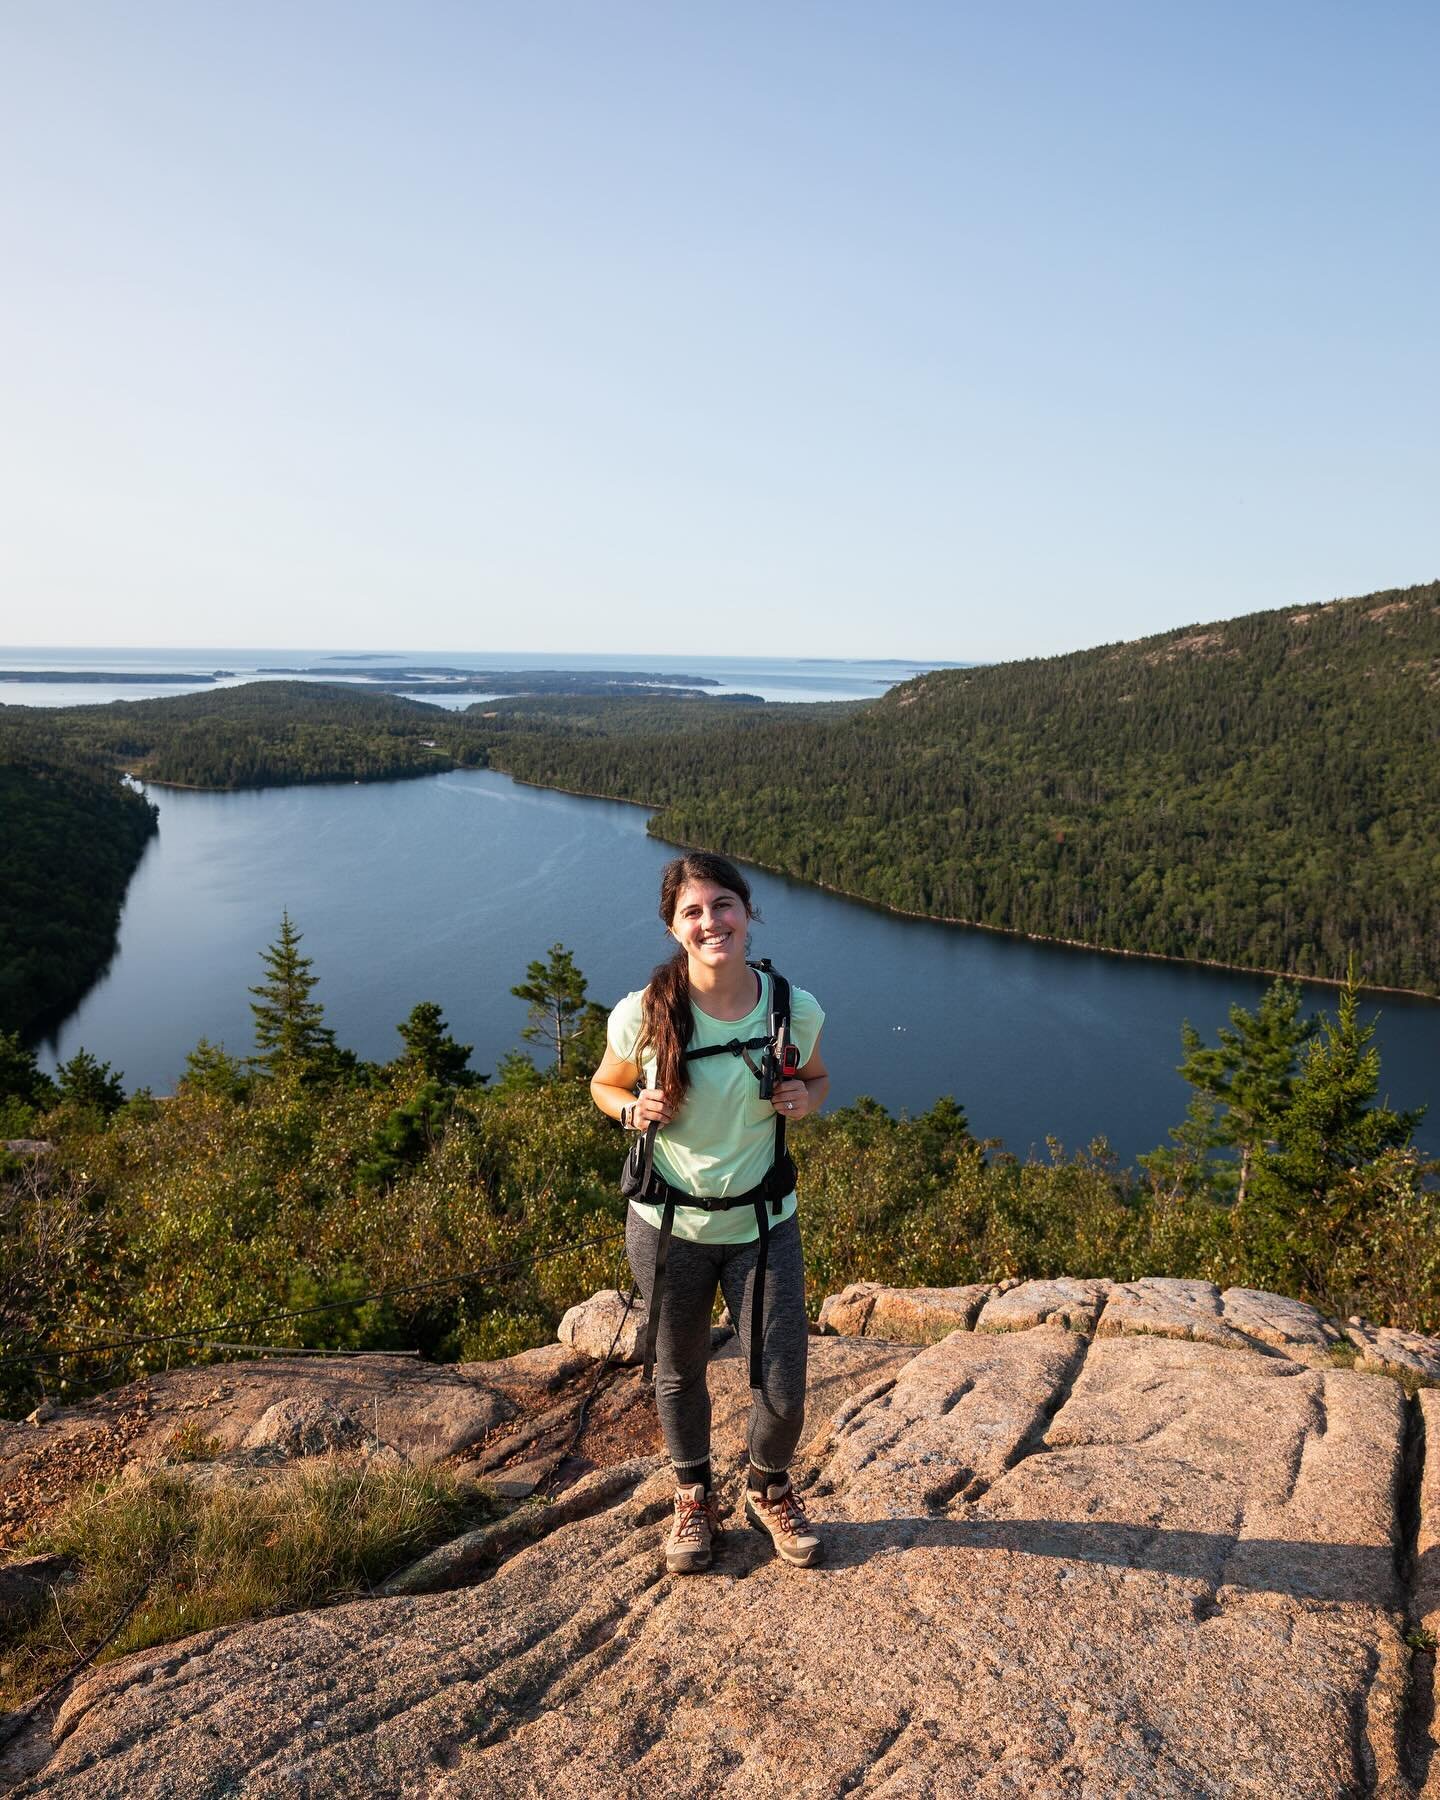 Acadia National Park is stunning BUT...

It is SO busy. Always. And it can be difficult to enjoy yourself when the crowds are crazy, especially during peak season.

Last year I had to visit Bar Harbor near a holiday, and I decided to try to find a wa